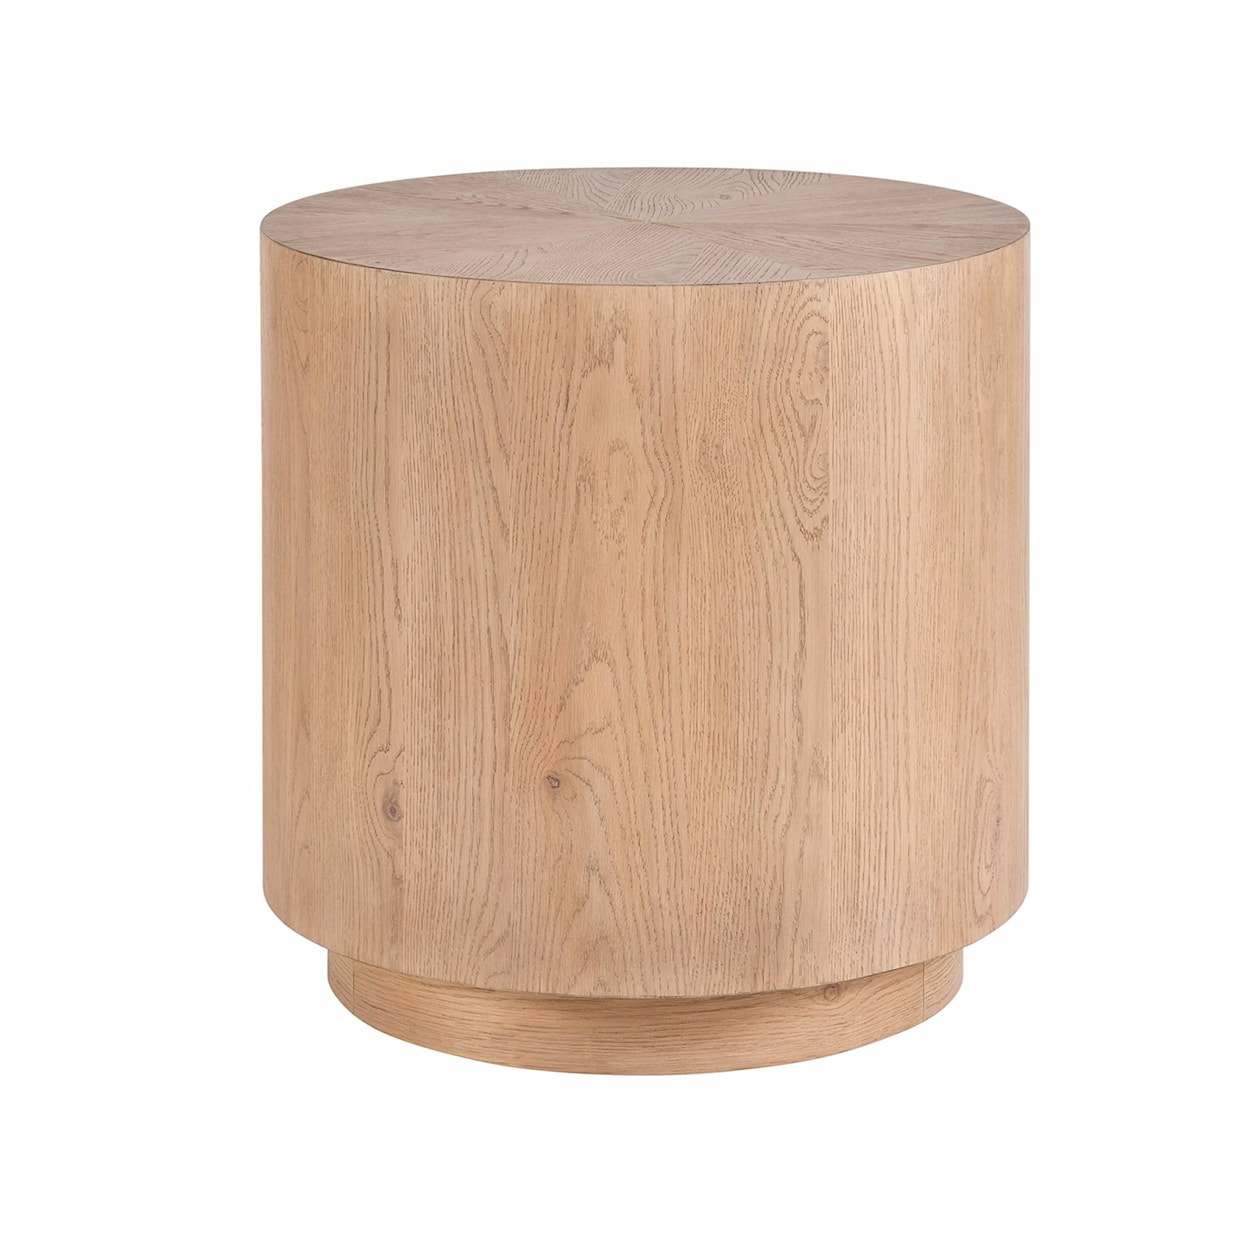 Universal Weekender Coastal Living Home Collection Round End Table